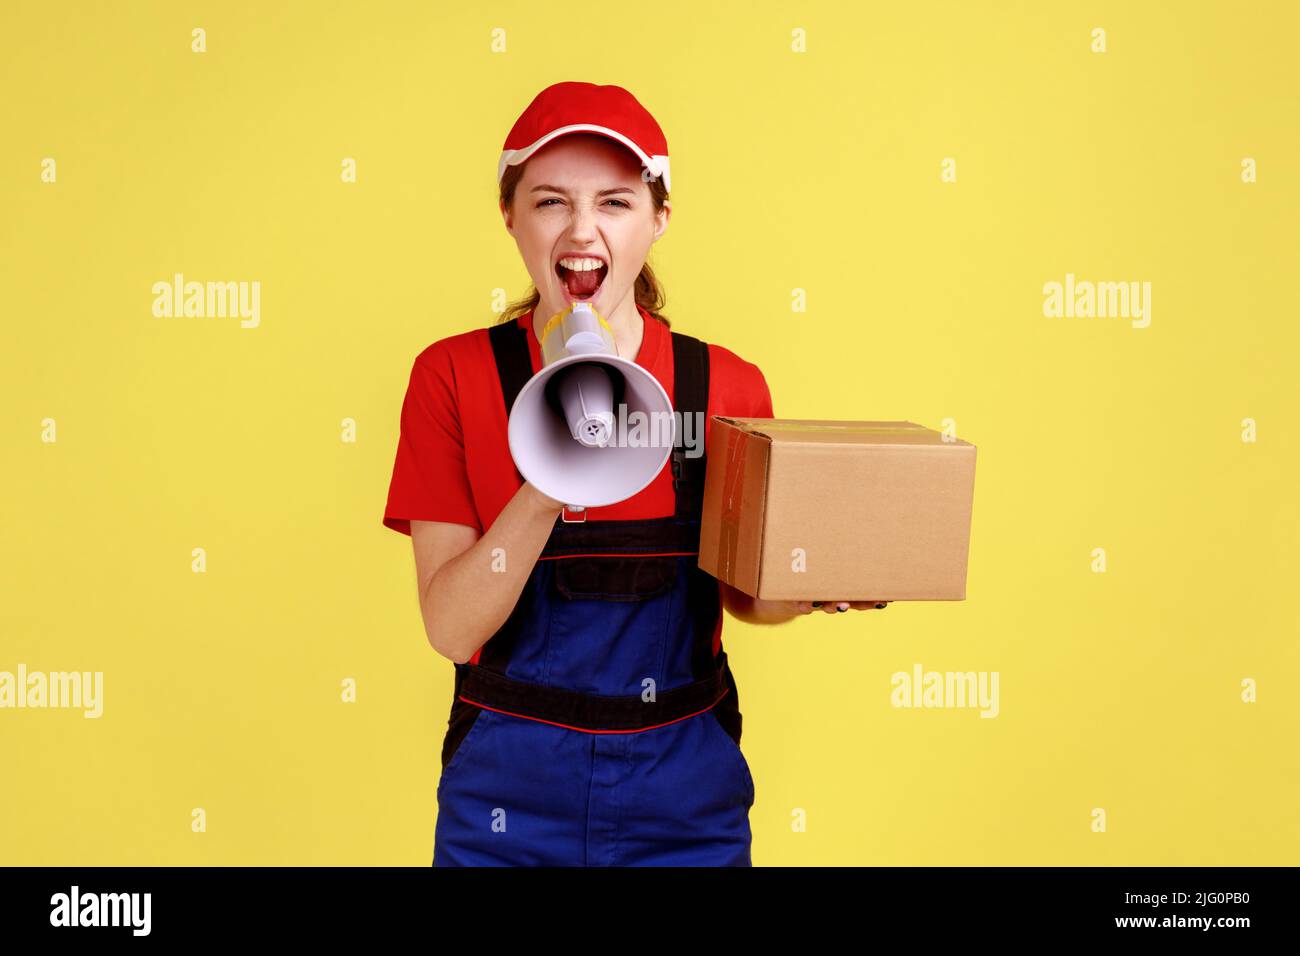 Portrait of angry courier woman holding cardboard box and screaming in megaphone, looking at camera with aggressive expression, wearing overalls. Indoor studio shot isolated on yellow background. Stock Photo